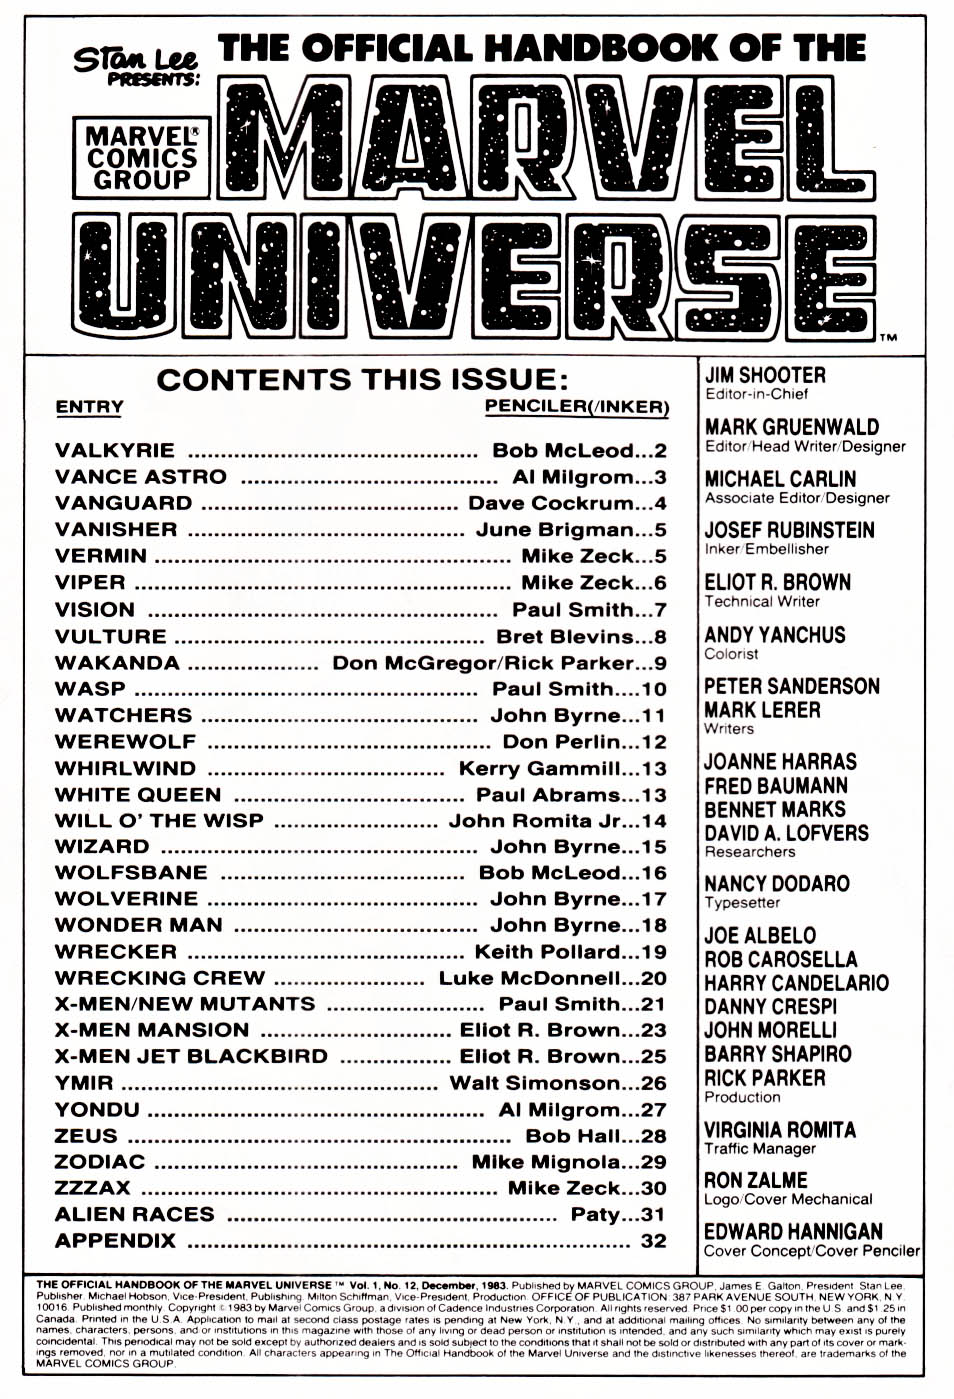 Read online The Official Handbook of the Marvel Universe comic -  Issue #12 - 2